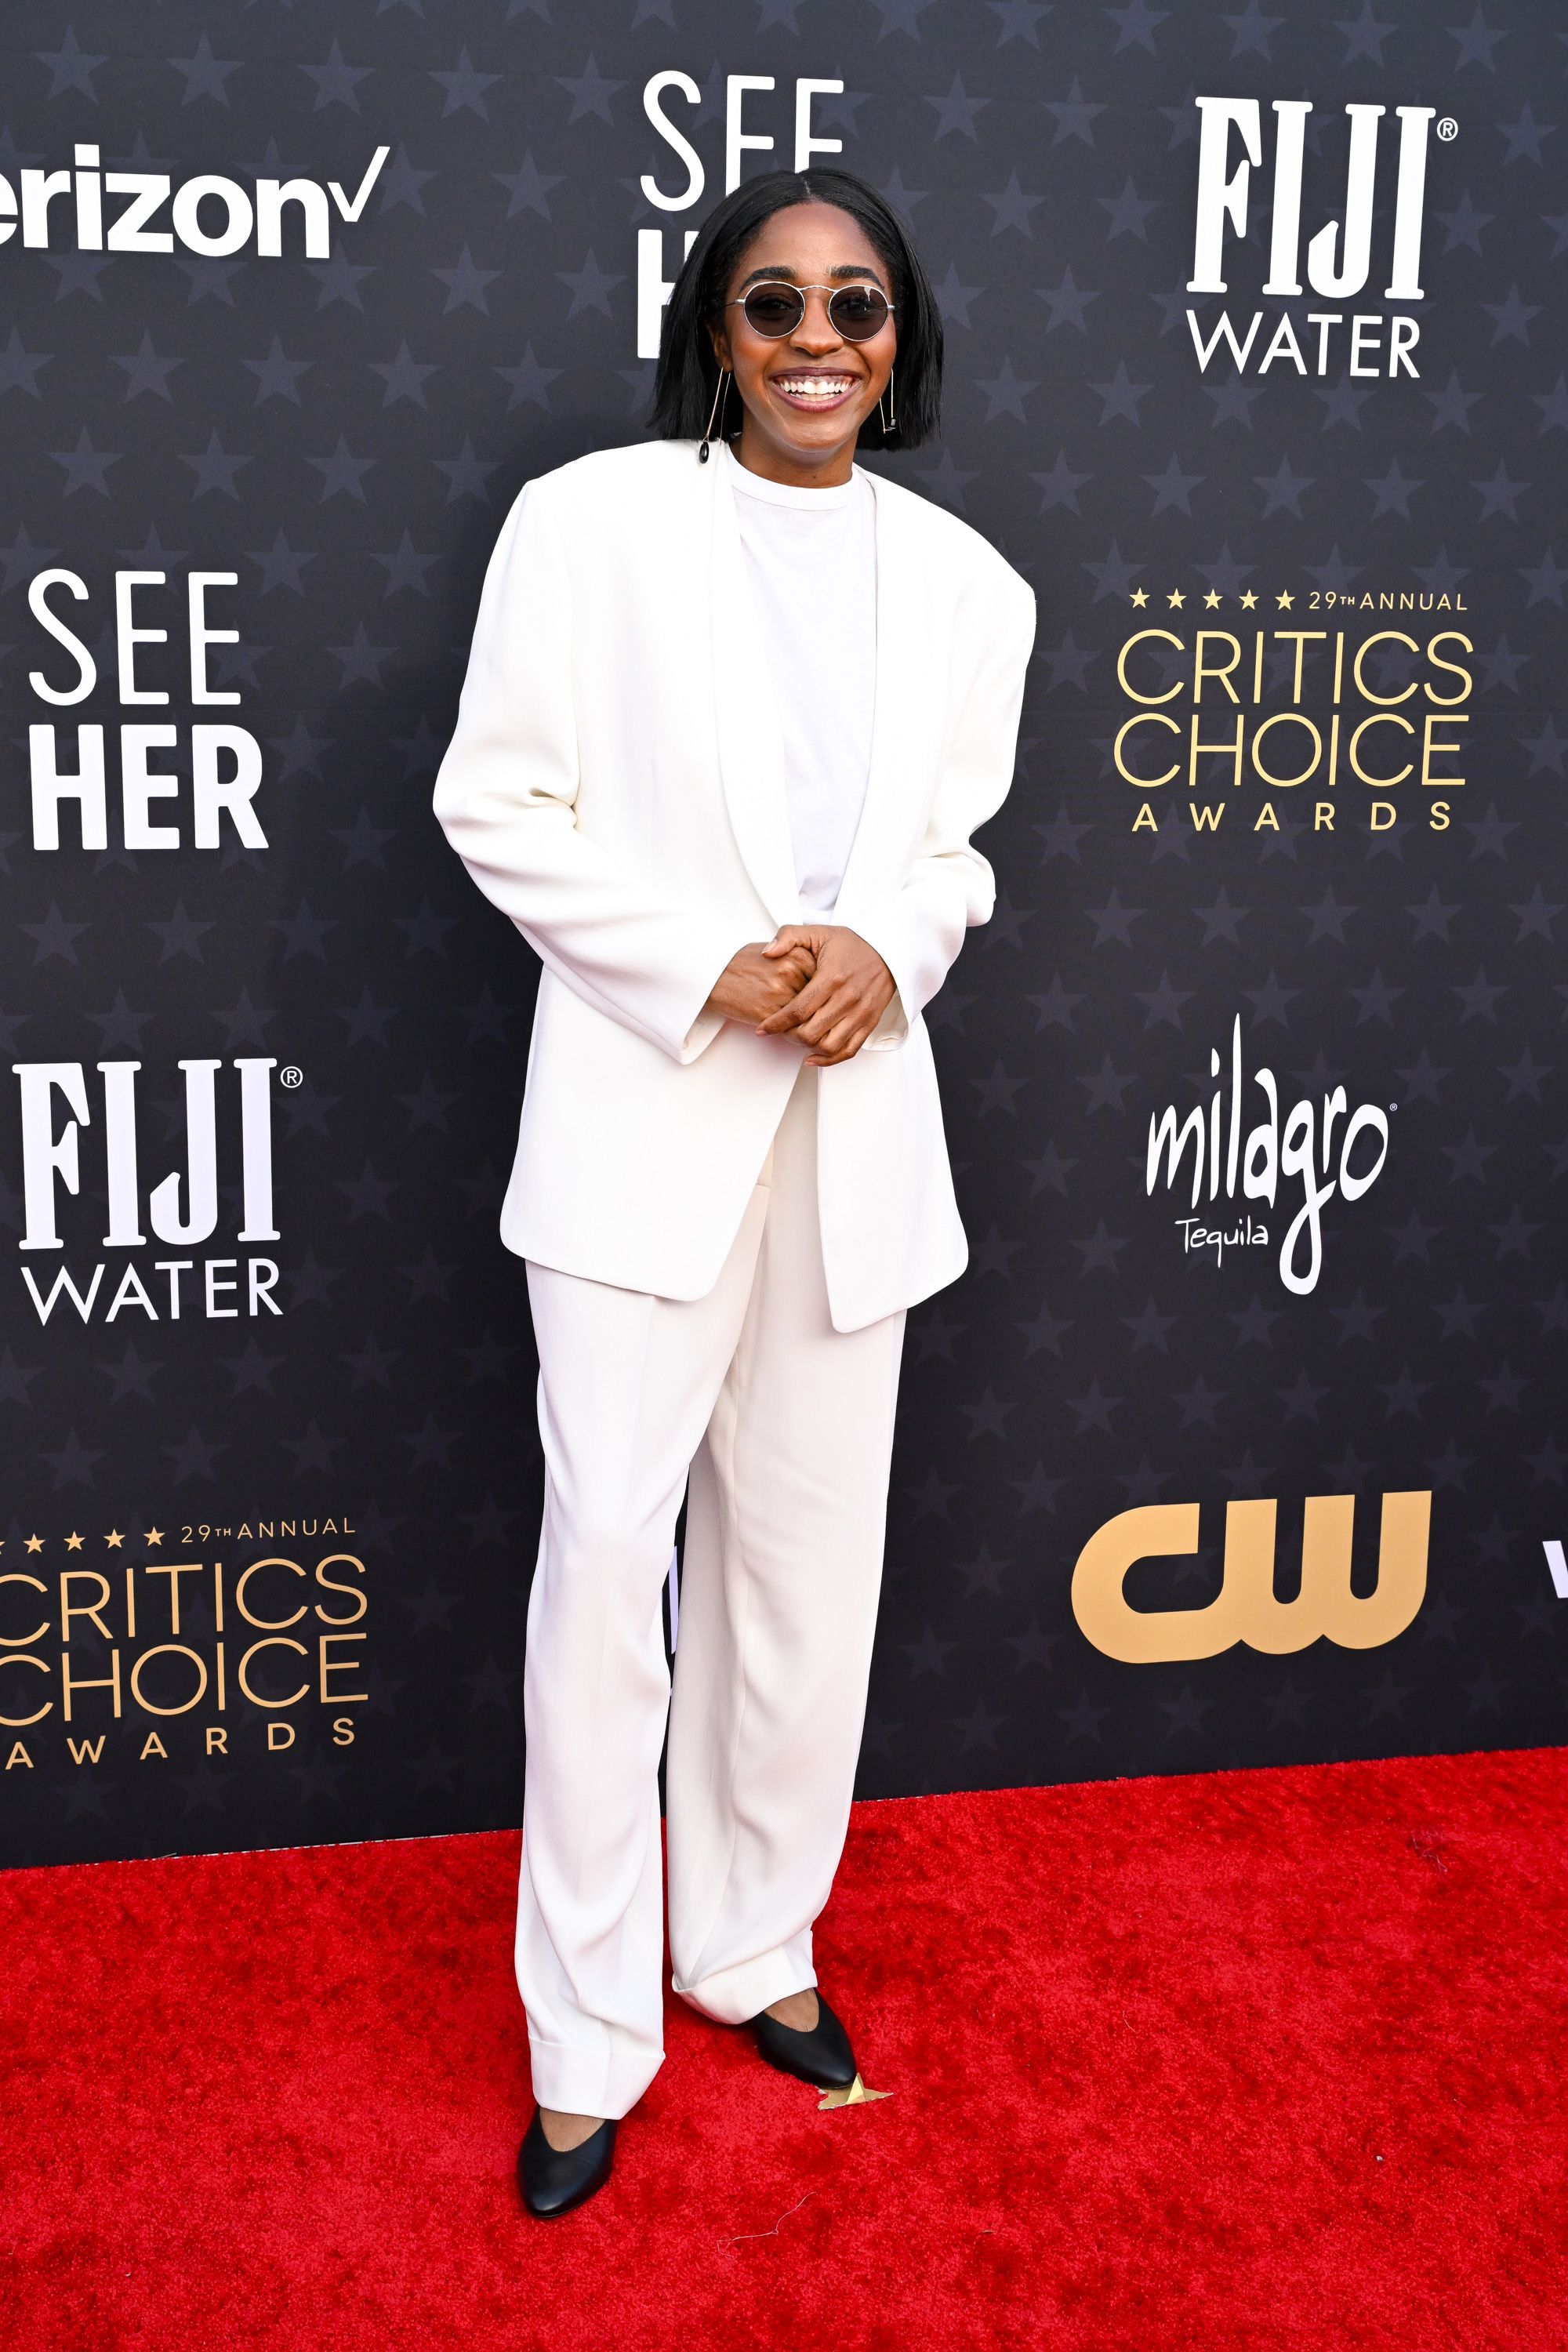 “The Bear” actress Ayo Edebiri arrived in an all-white suit by the The Row and Oliver Peoples sunglasses.